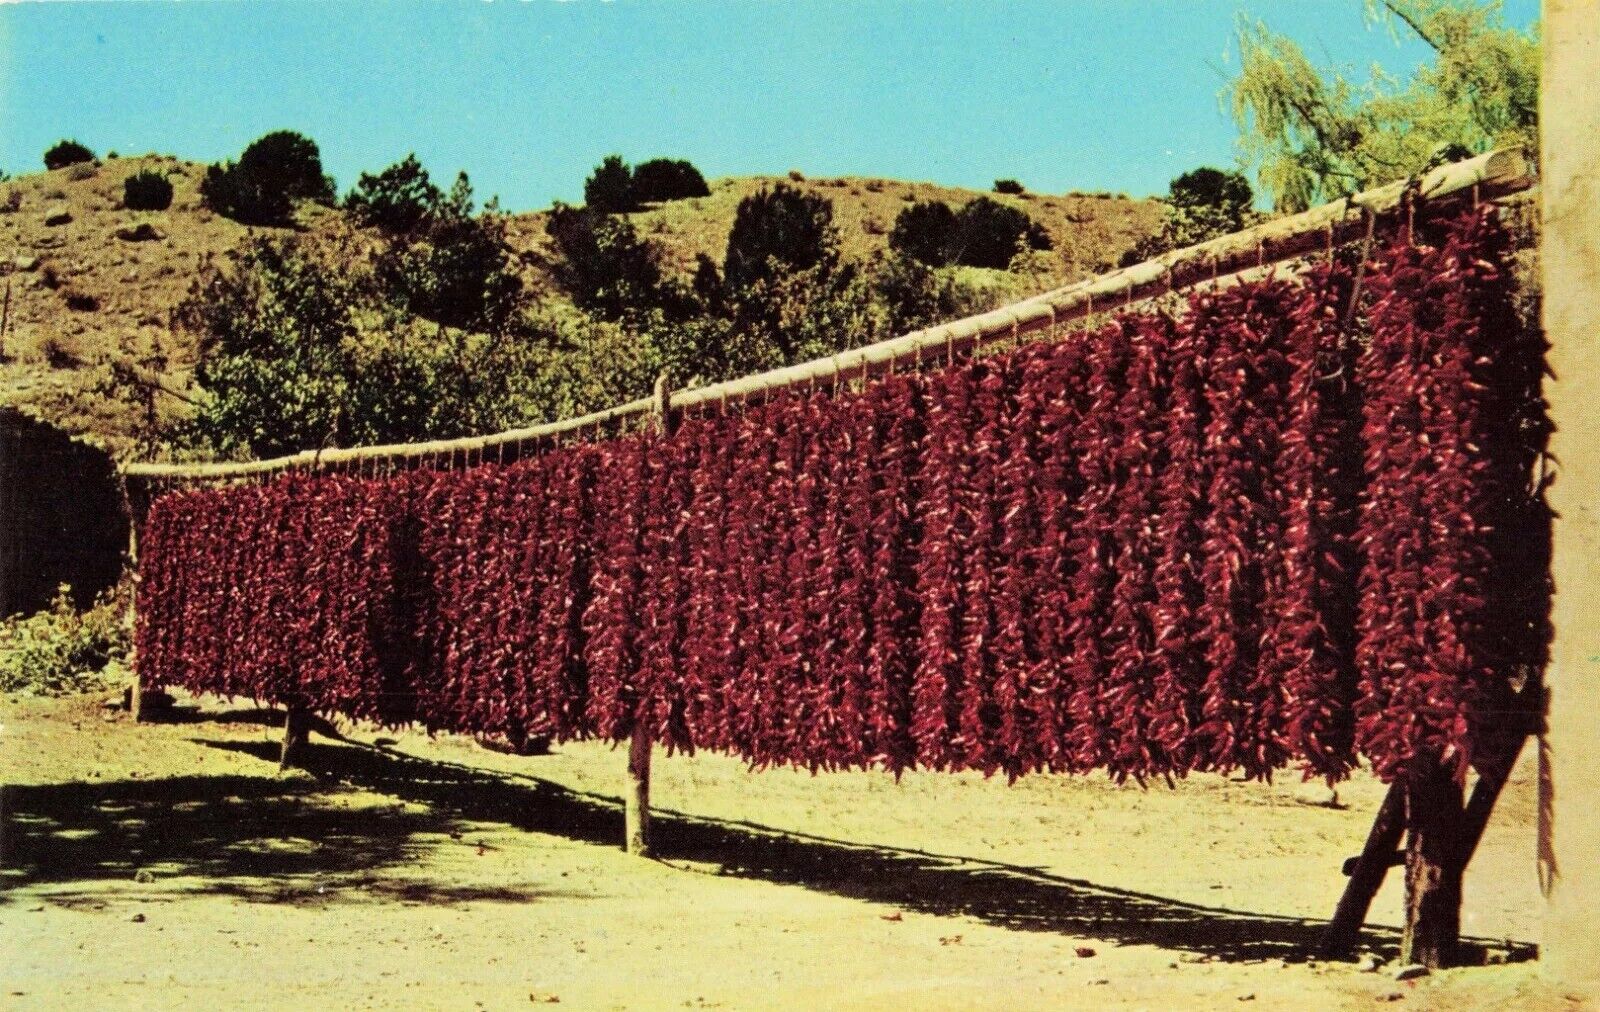 Strings of Red Chili Peppers Hanging Out To Dry - Postcard